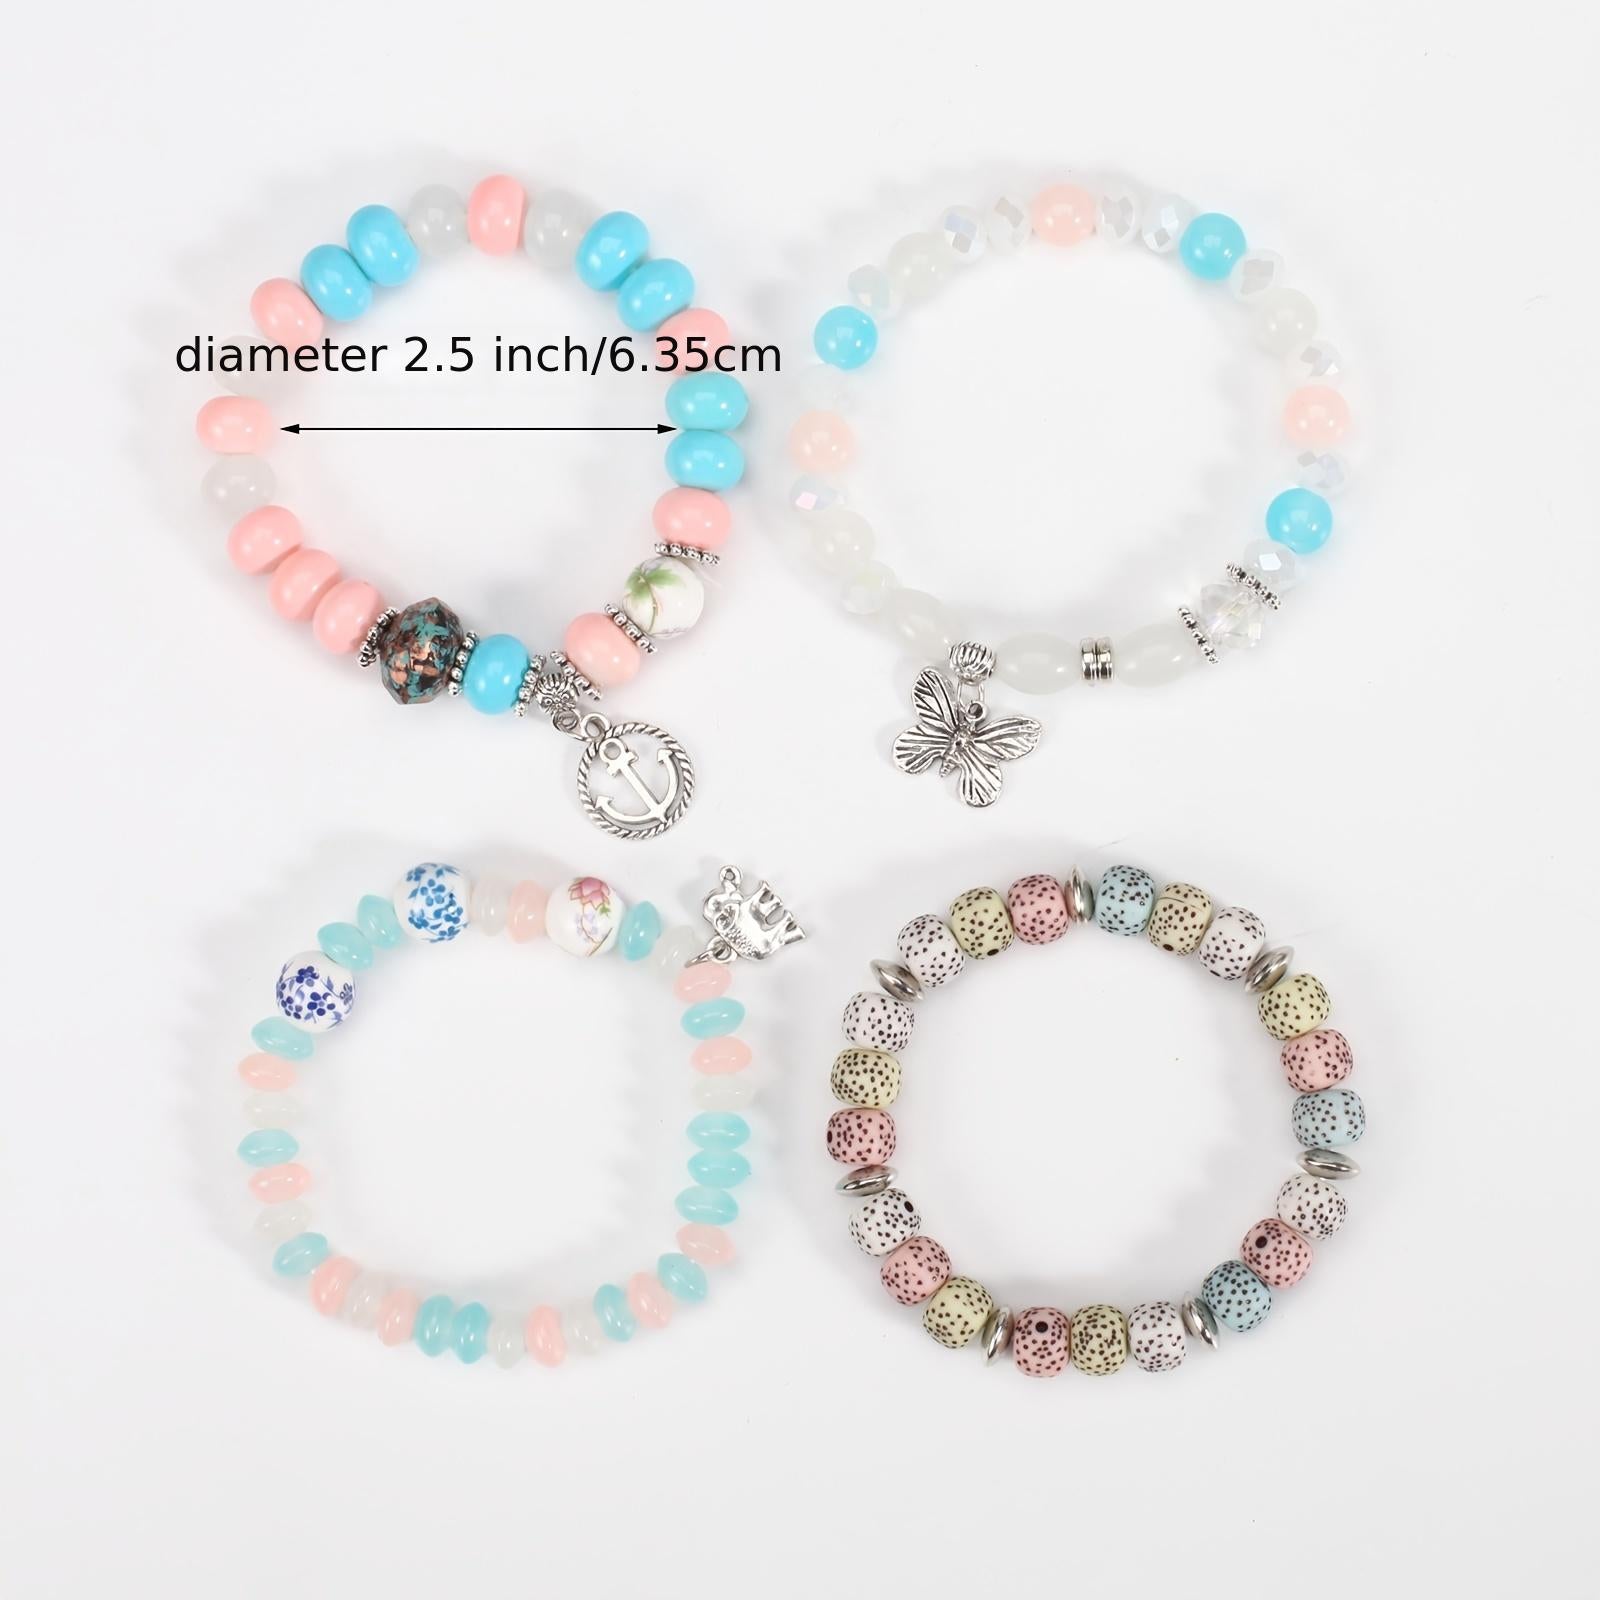 Bohemian Layered Beaded Bracelet with Elephant, Anchor, and Butterfly Pendants